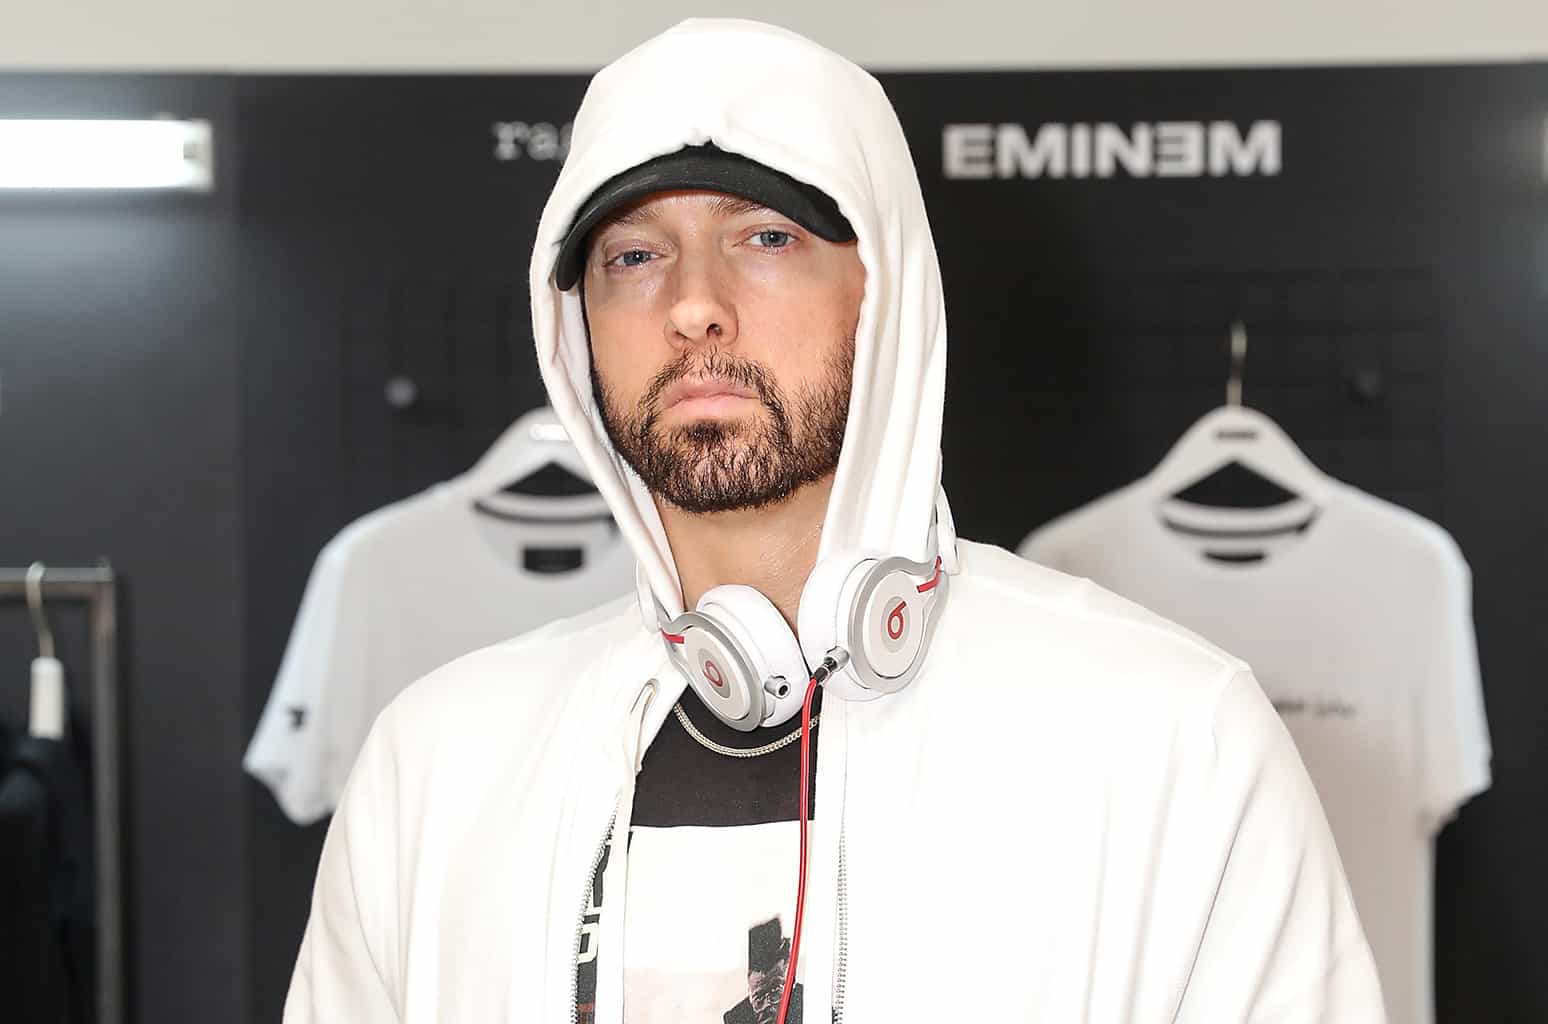 Eminem's 'Kamikaze' Debuted at Number 1 on Billboard 200, his 9th Consecutive #1 Album1548 x 1024